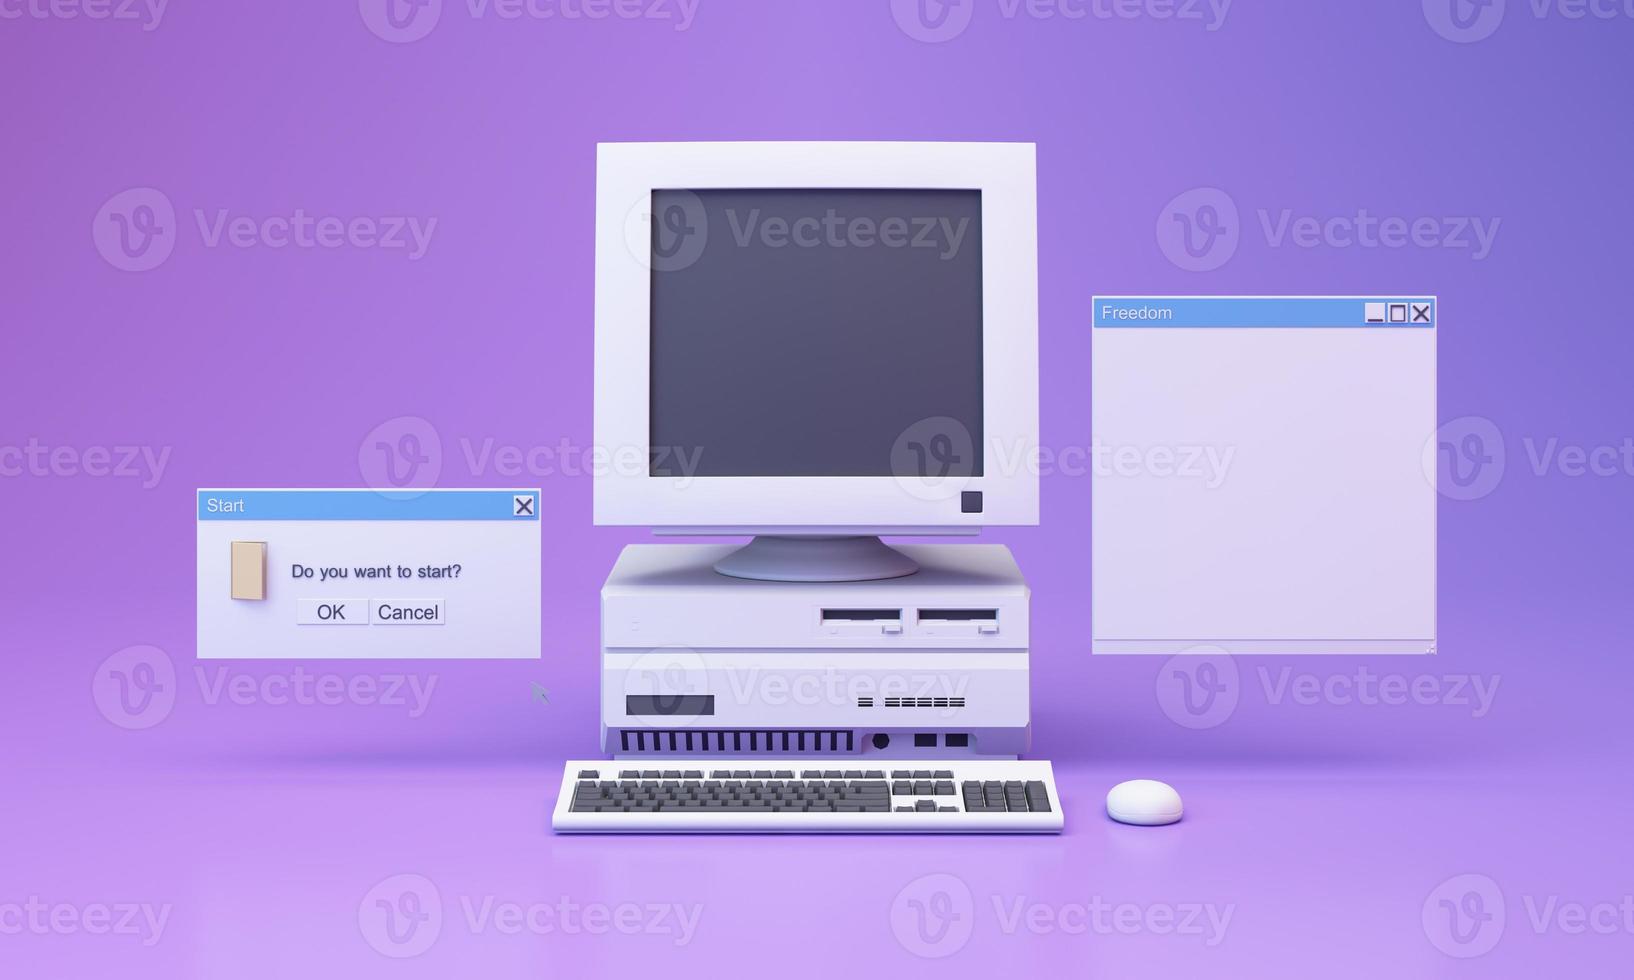 Abstract aesthetic background with 90s style system message windows, old vintage computer, mouse, keyboard, pop up icon system message window on pink and purple gradient y2k style realistic 3d render photo